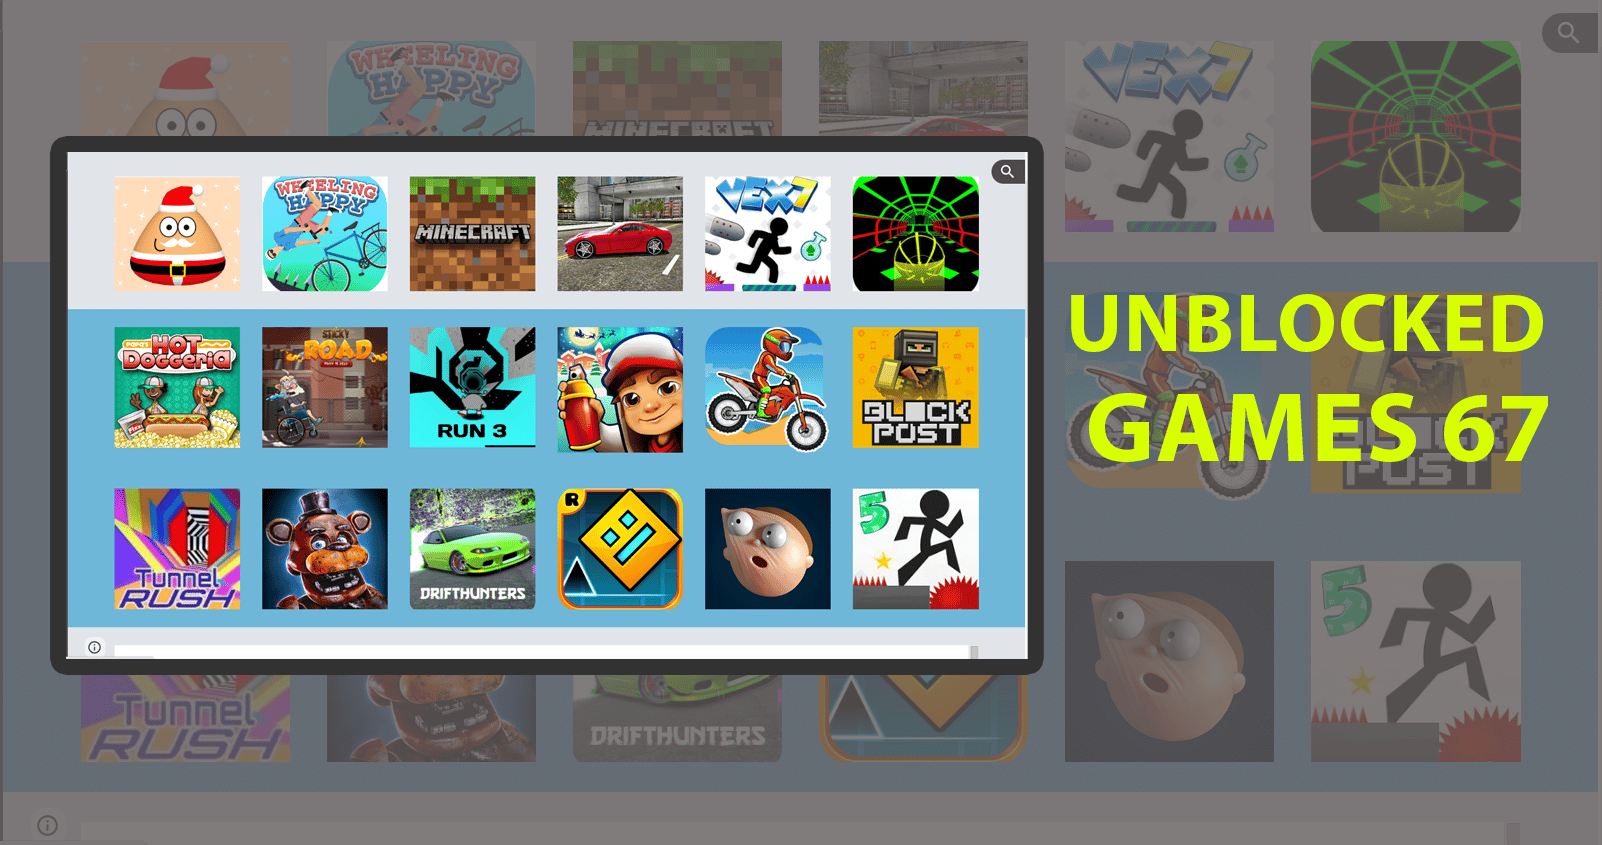 The Ultimate List of Unblocked Games 67: Endless Fun at Your Fingertips 